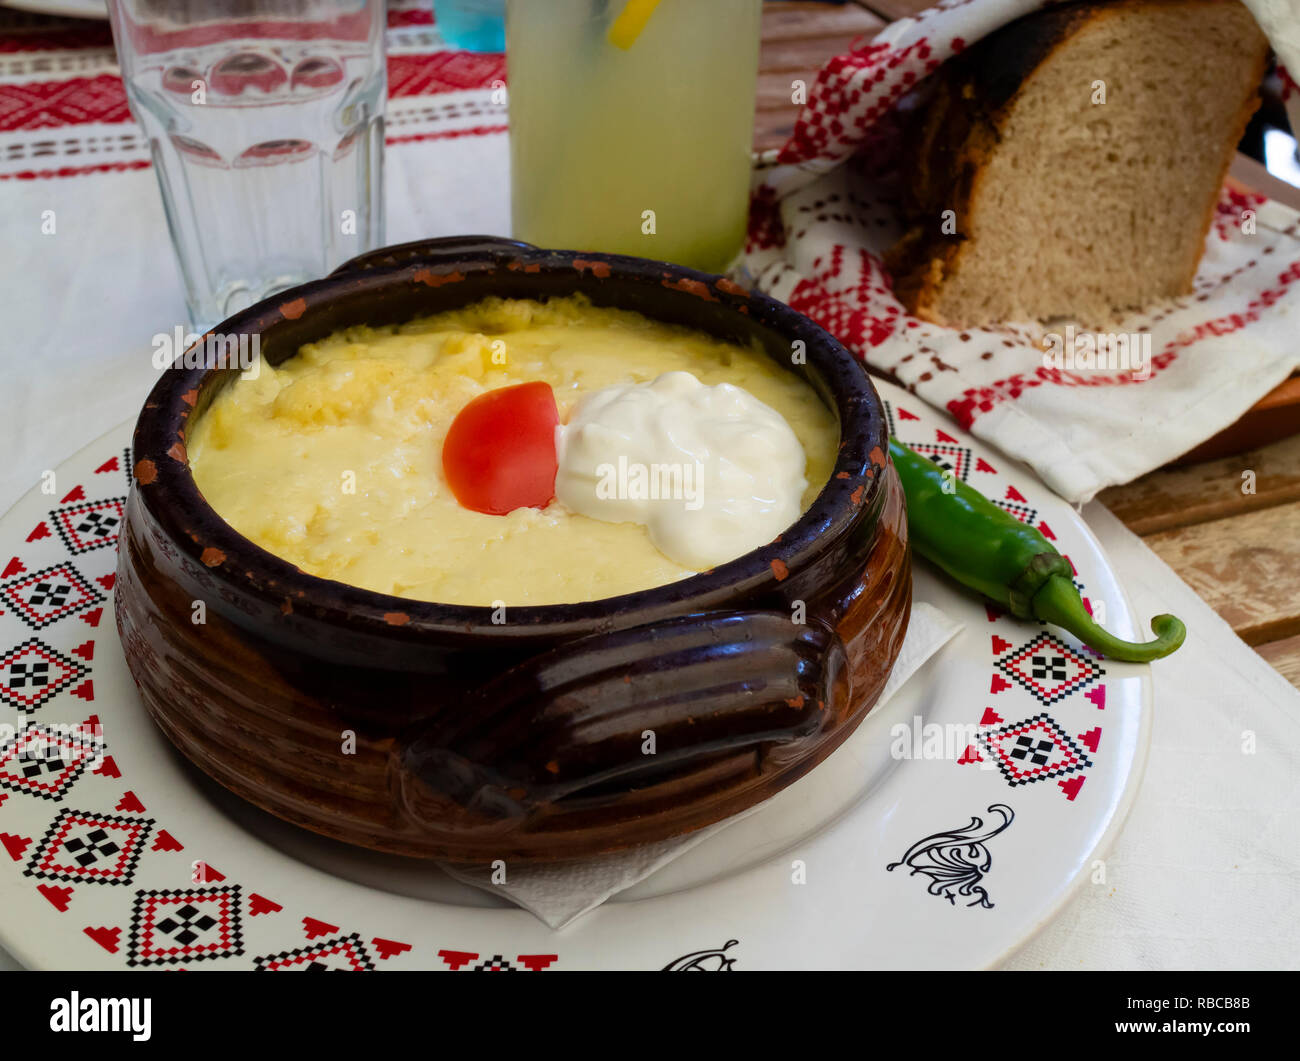 Mamaliga, a traditional romanian dish, made of polenta, served with sour cream and tomato Stock Photo